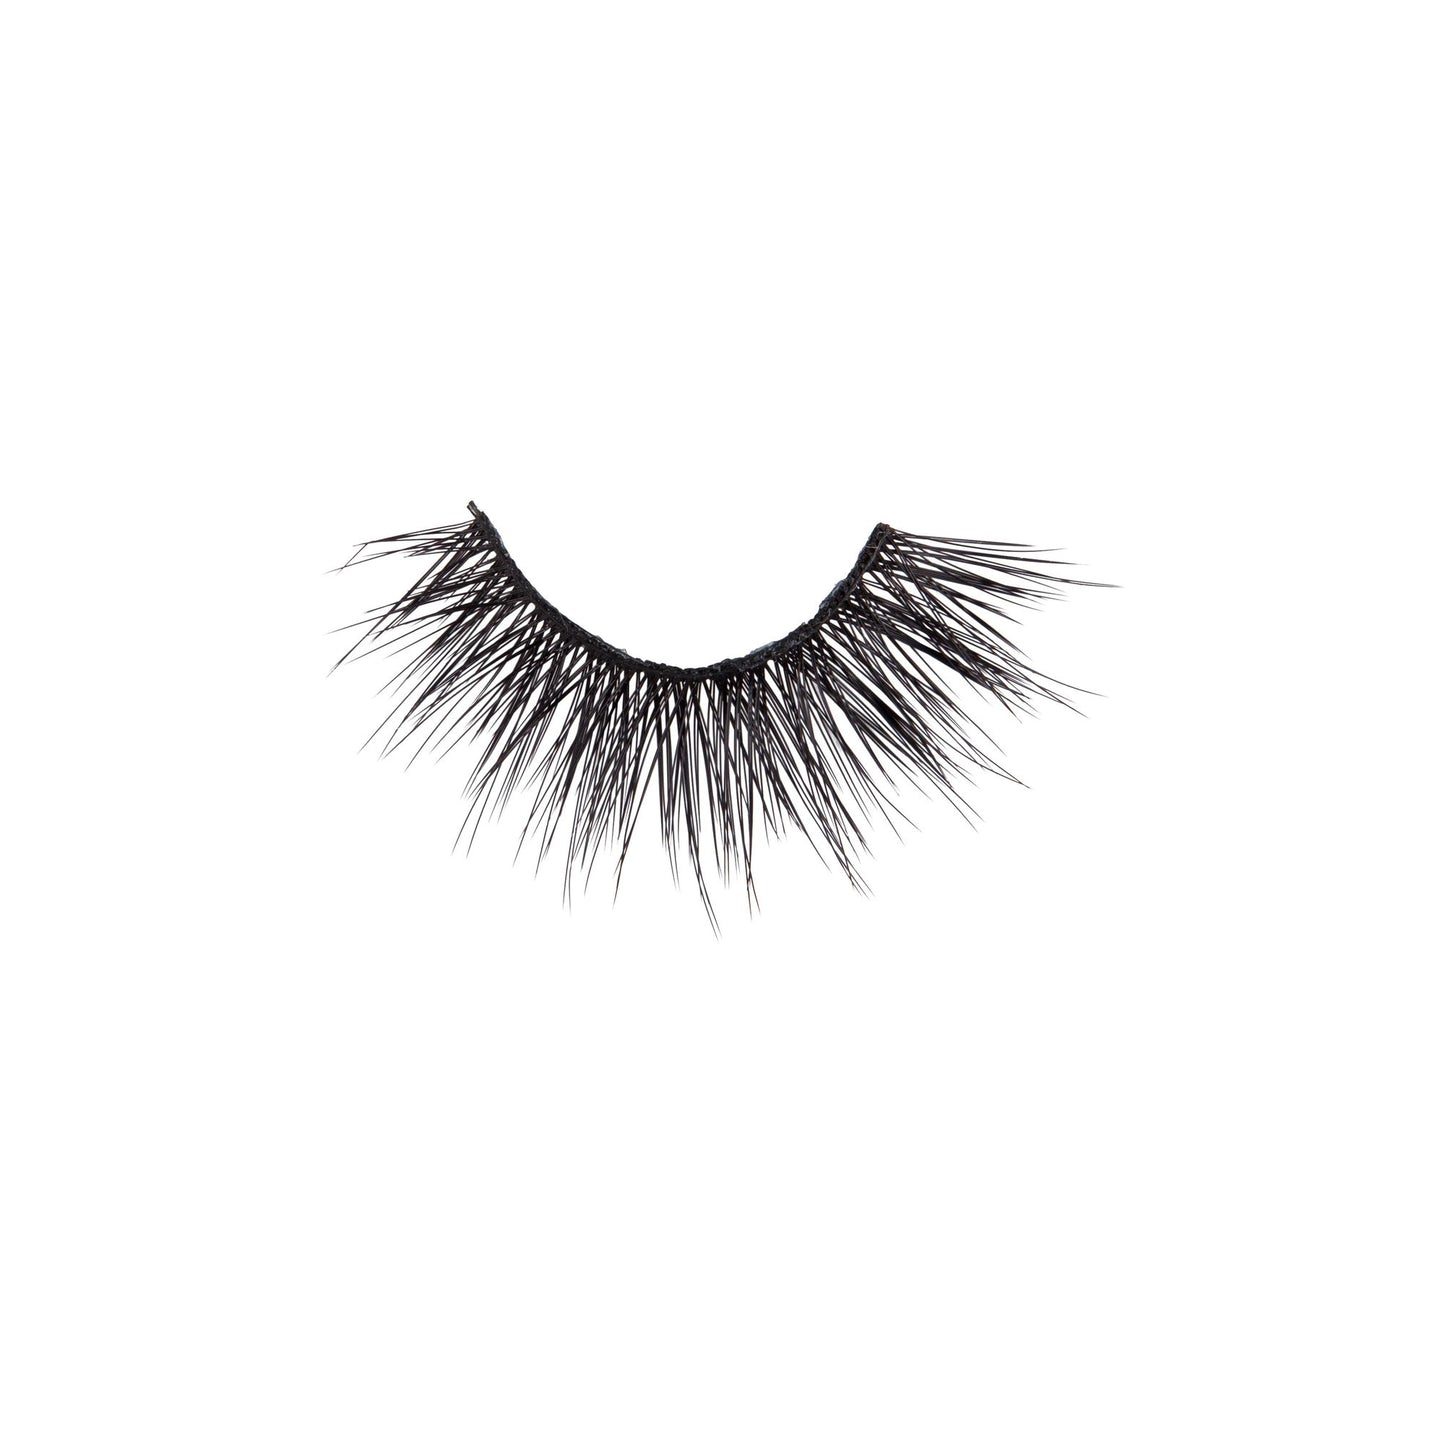 Finesse - 3D Silk Lashes